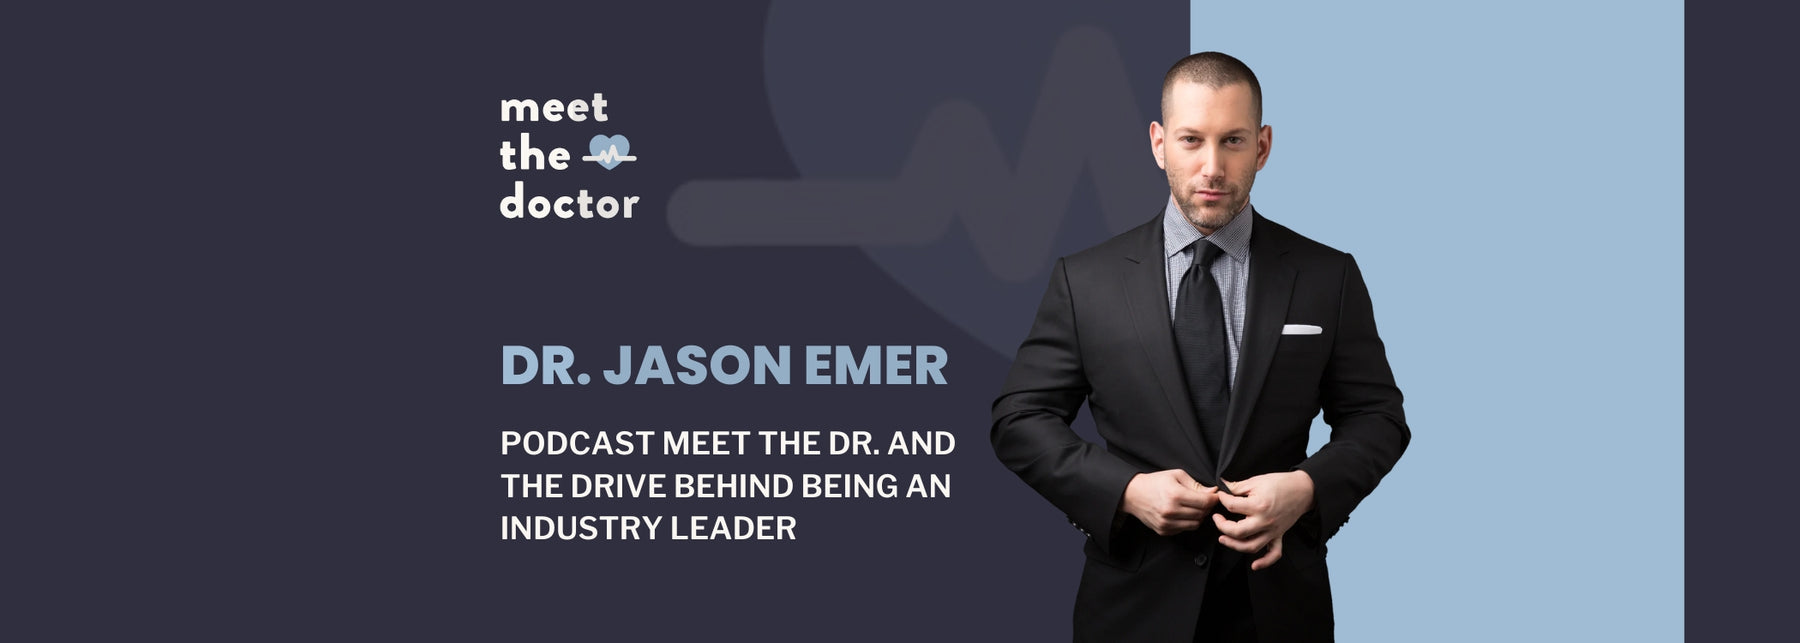 Podcast meet the Dr. and the drive behind being and industry leader